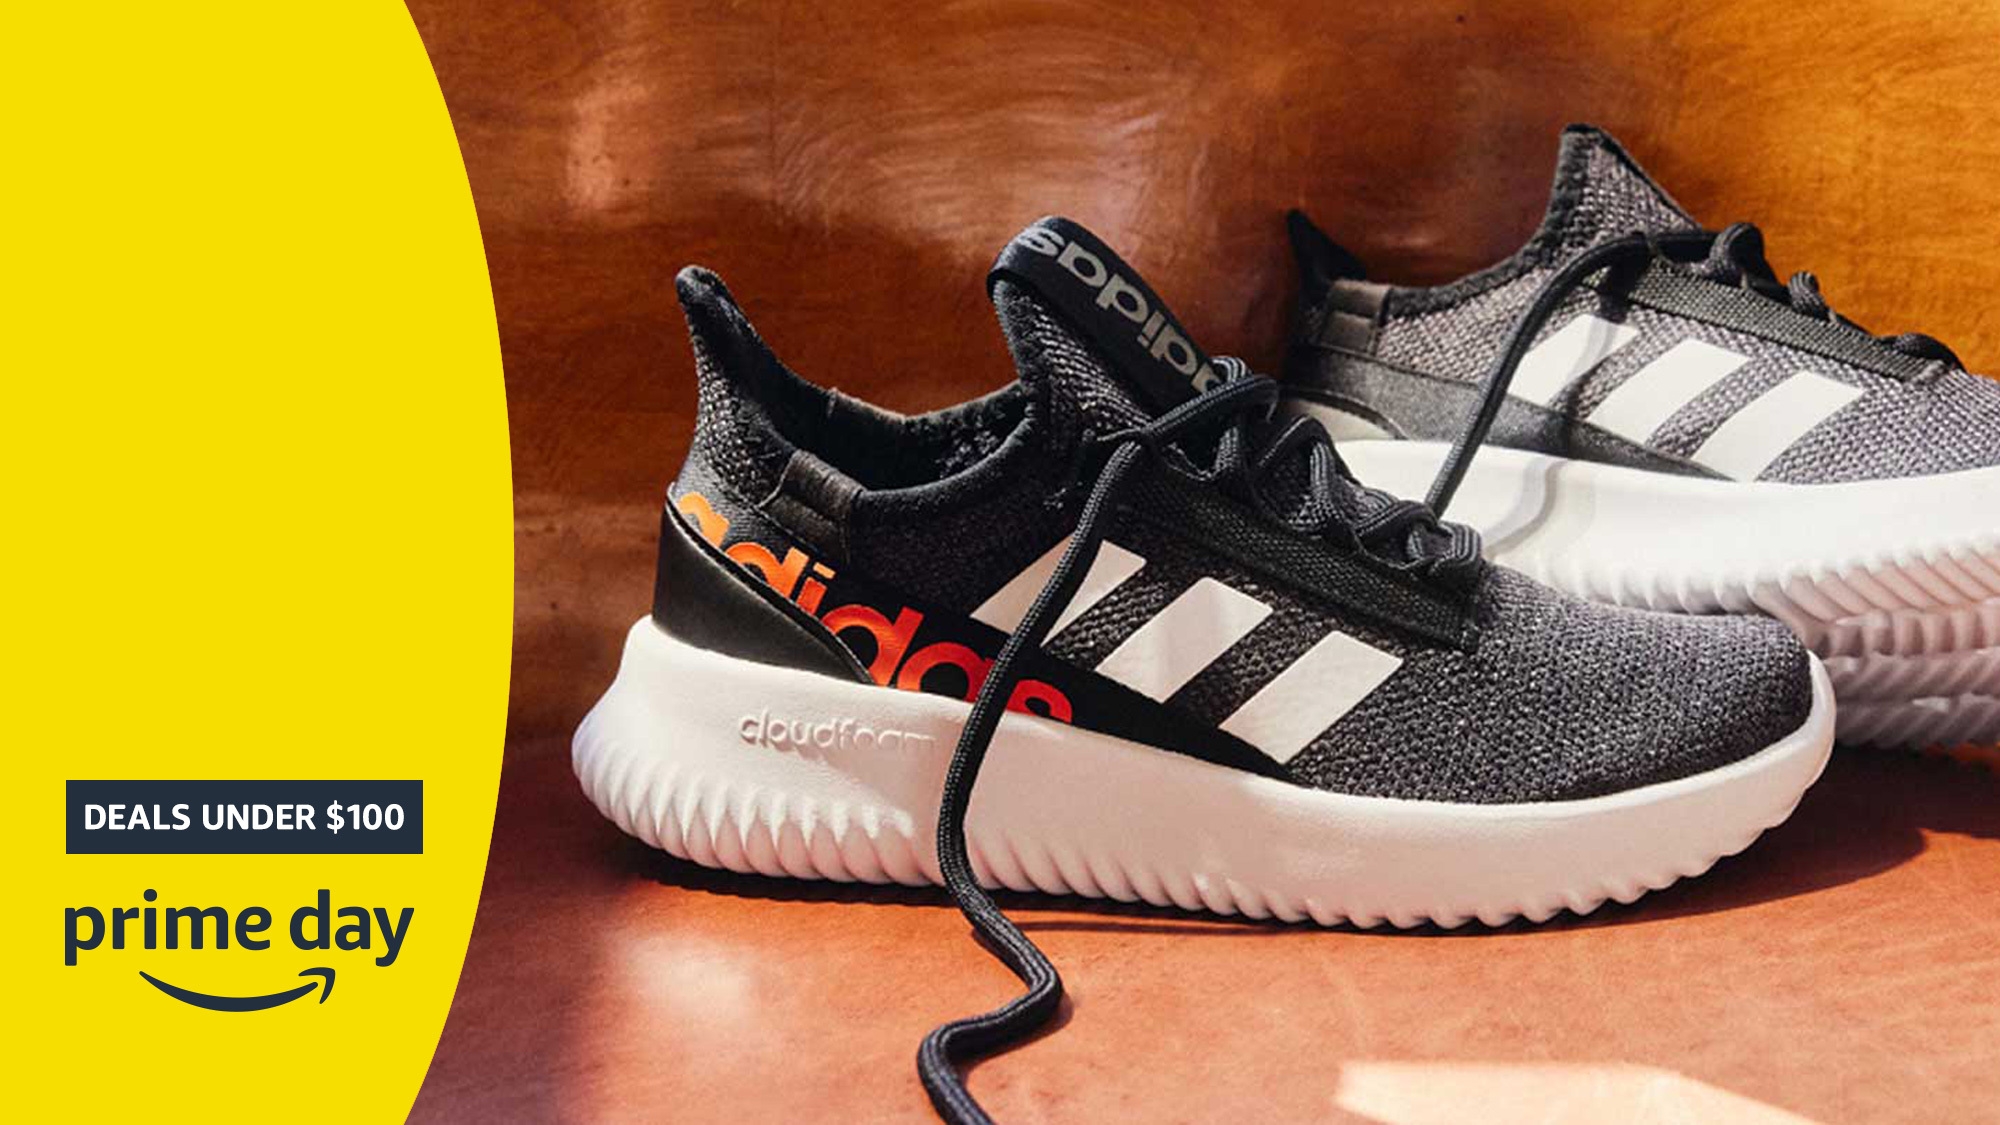 Prime Day deals under $100 image featuring black Adidas sneakers.